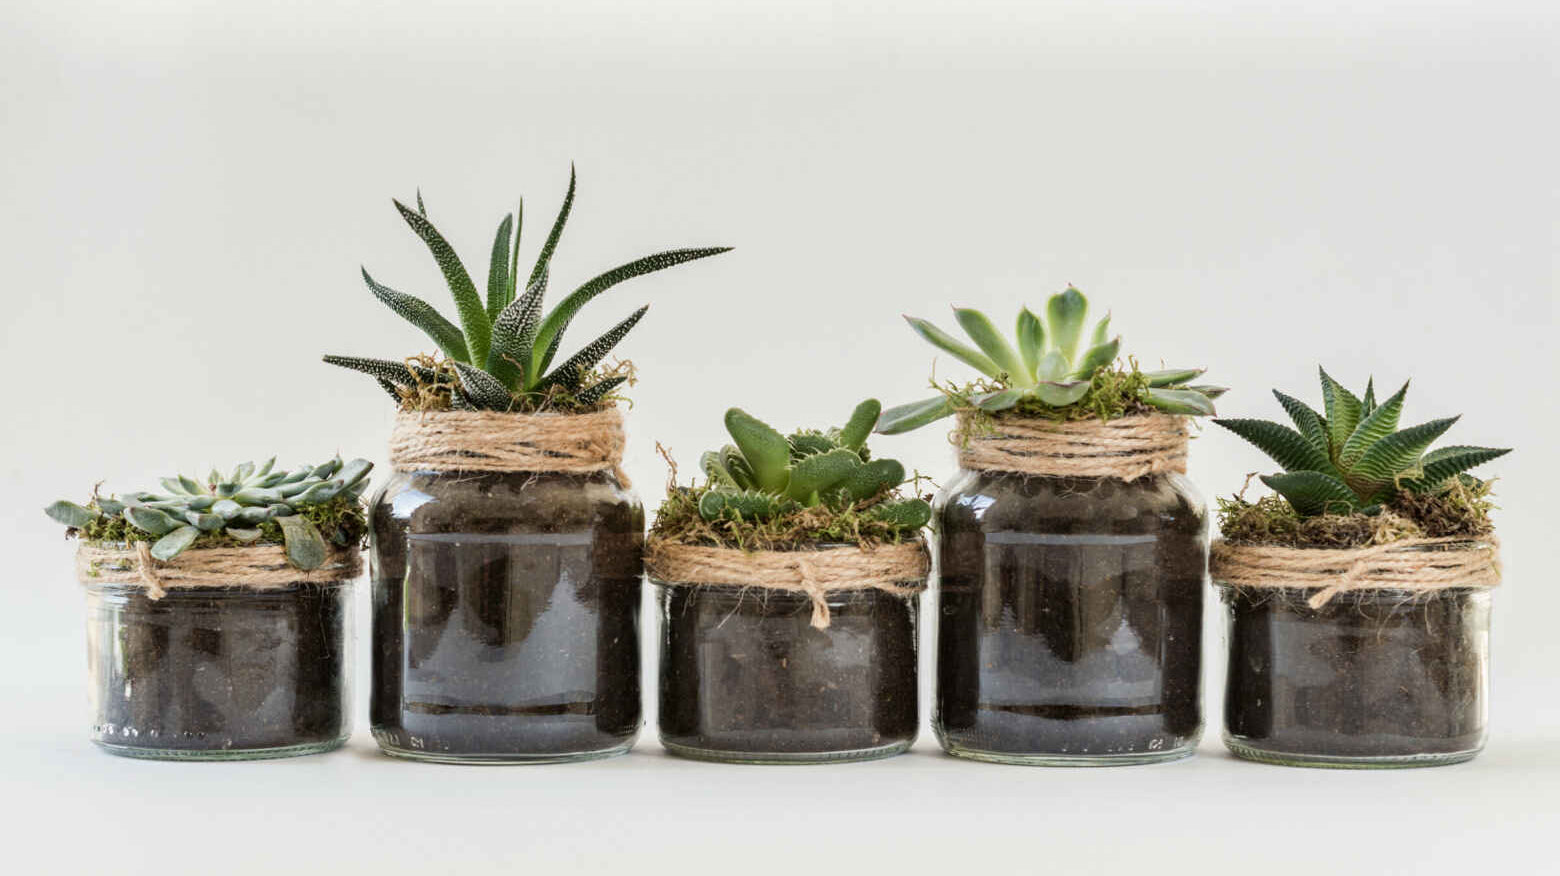 Used candle jars being used as vases for plants.